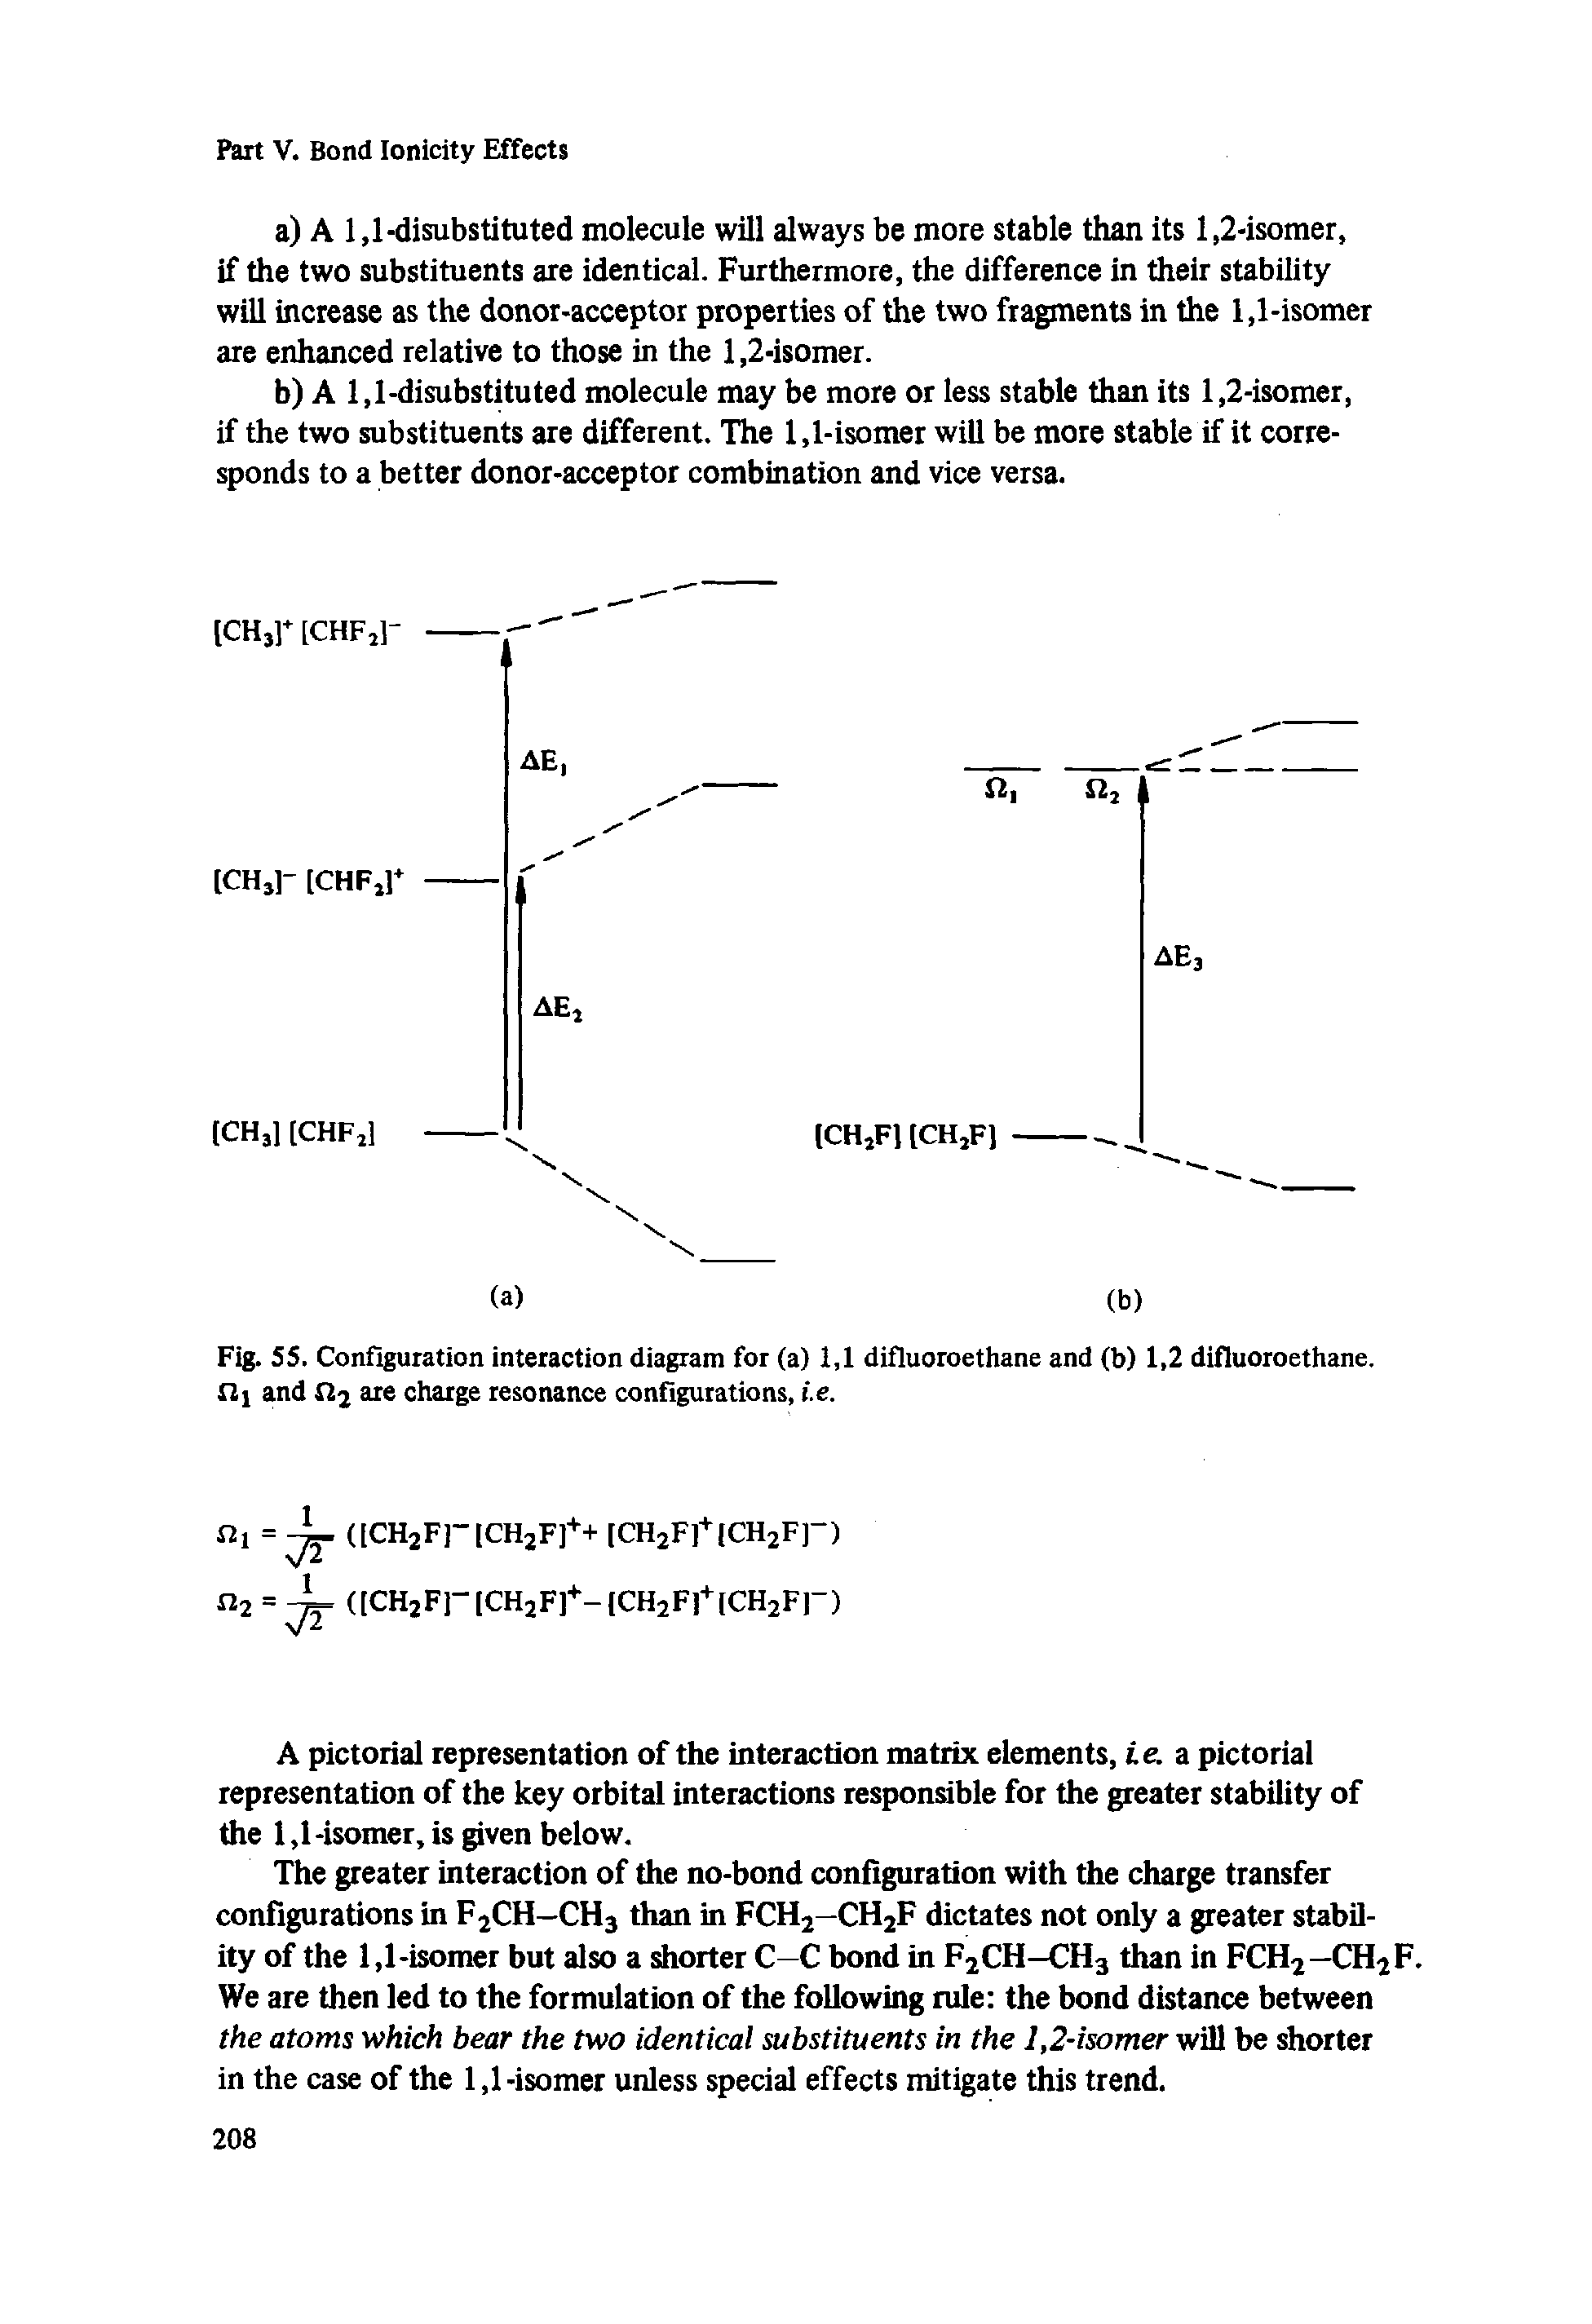 Fig. 55. Configuration interaction diagram for (a) 1,1 difluoroethane and (b) 1,2 difluoroethane. nj and ft2 are charge resonance configurations, i.e.